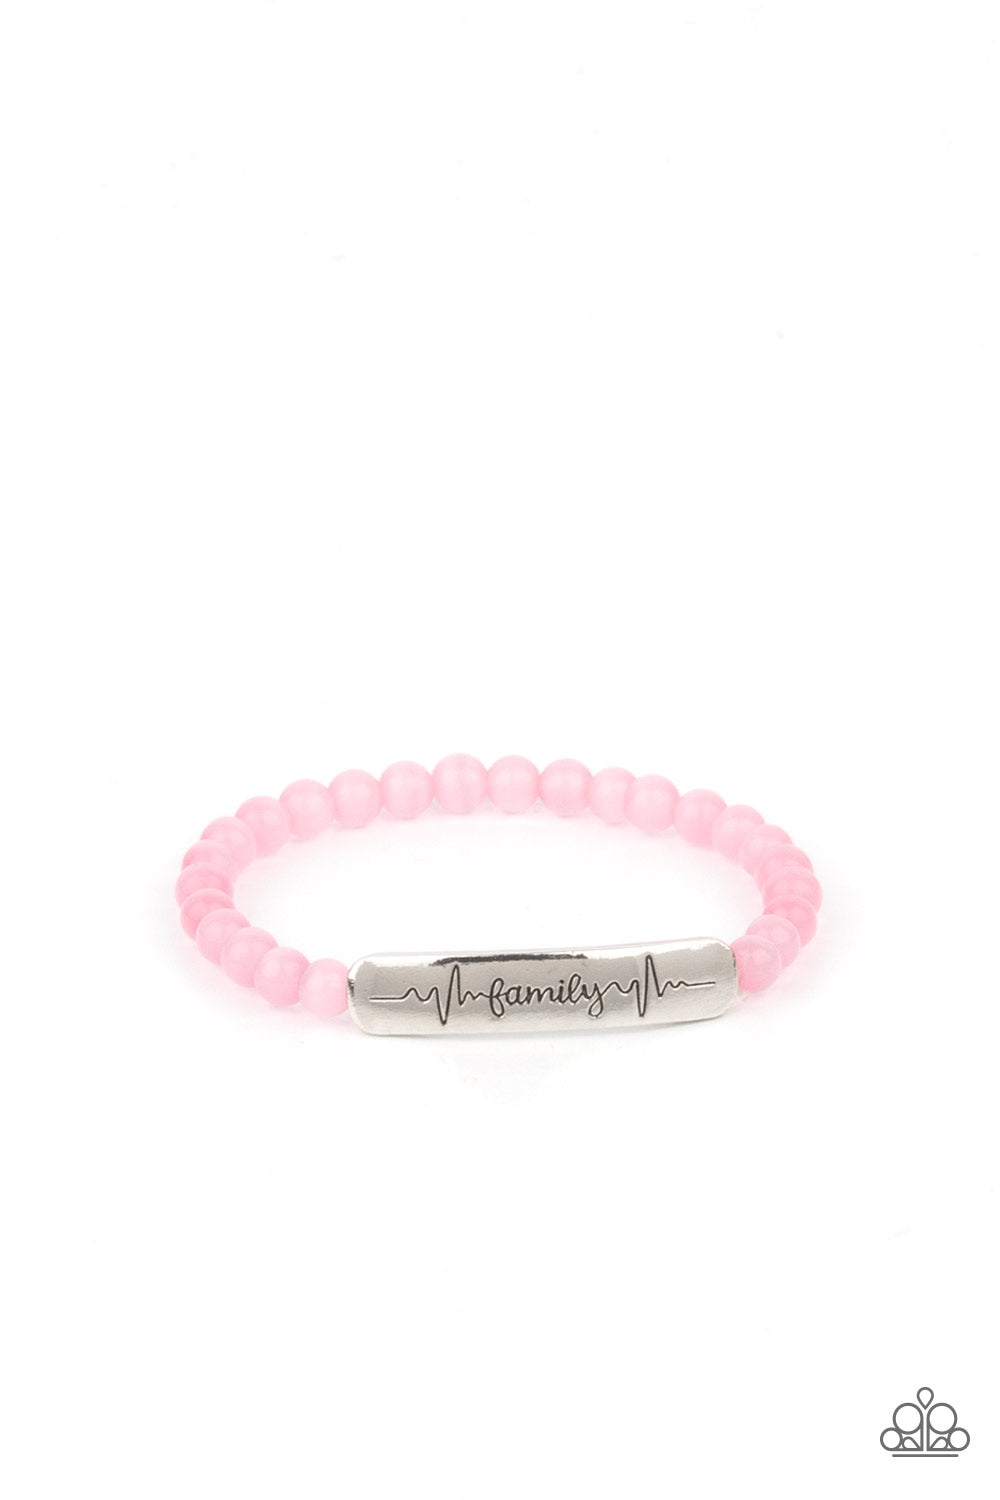 Paparazzi Family is Forever - Pink Bracelet